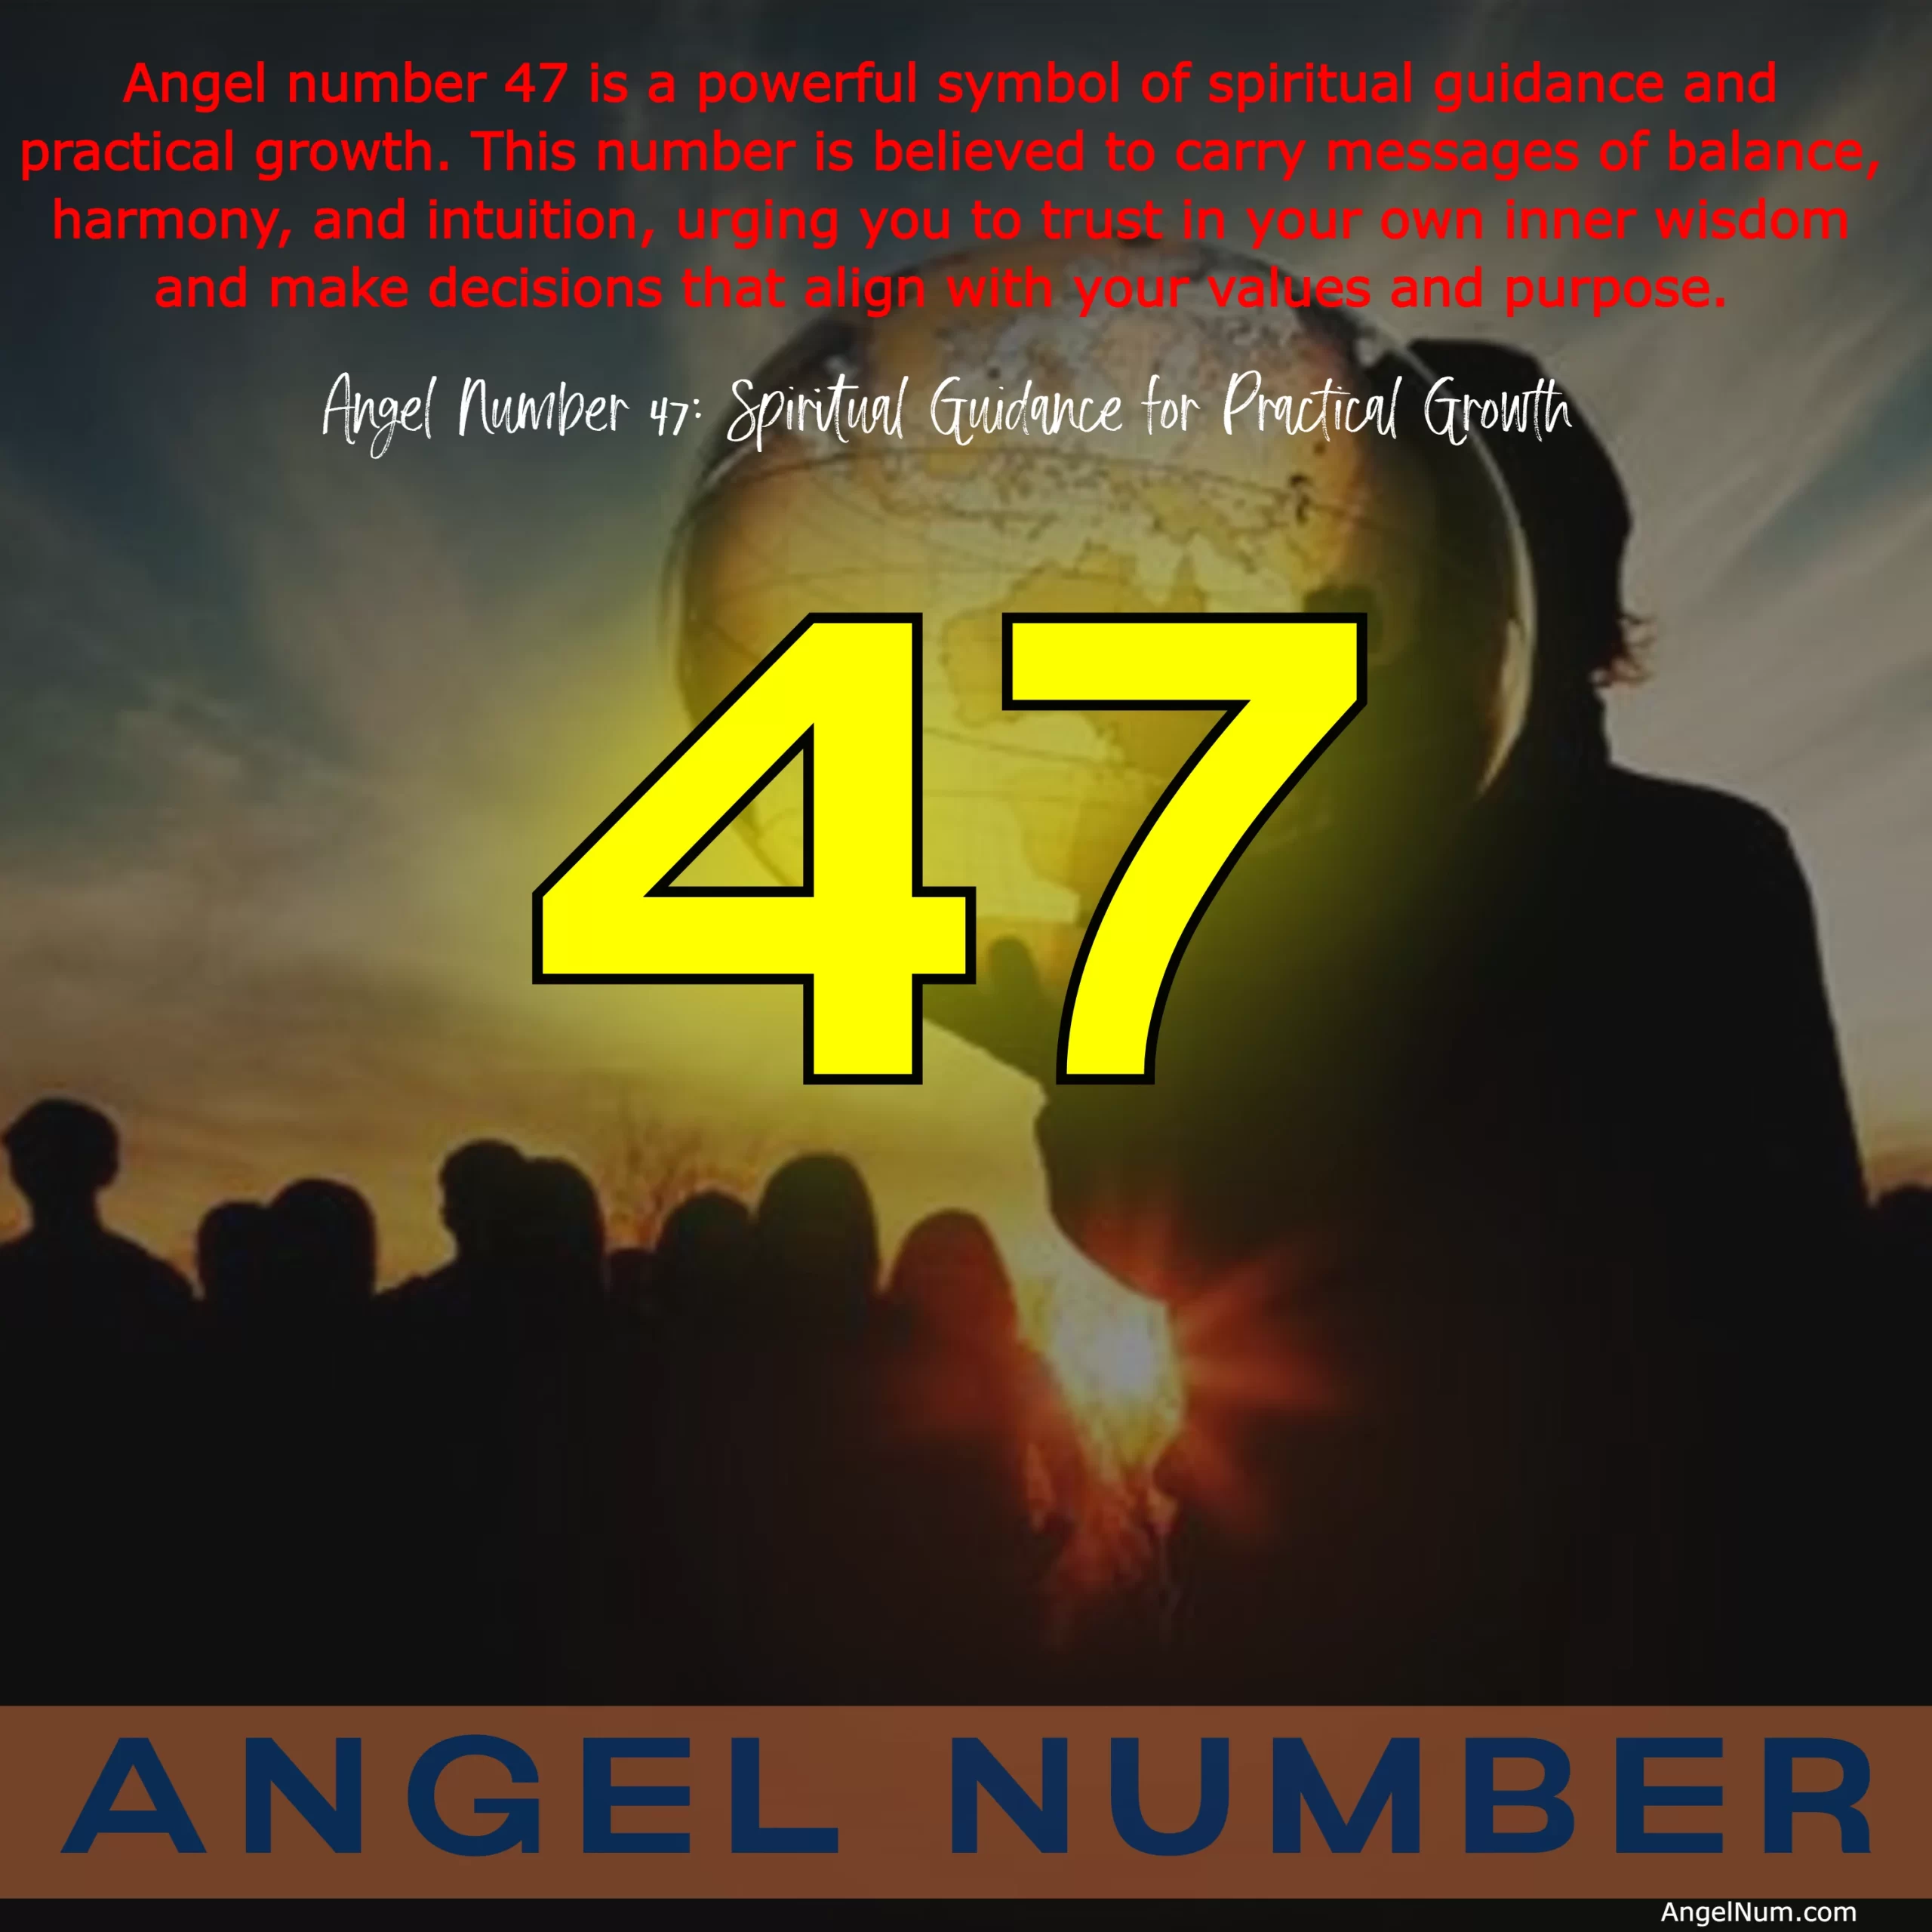 Angel Number 47: Spiritual Guidance for Practical Growth